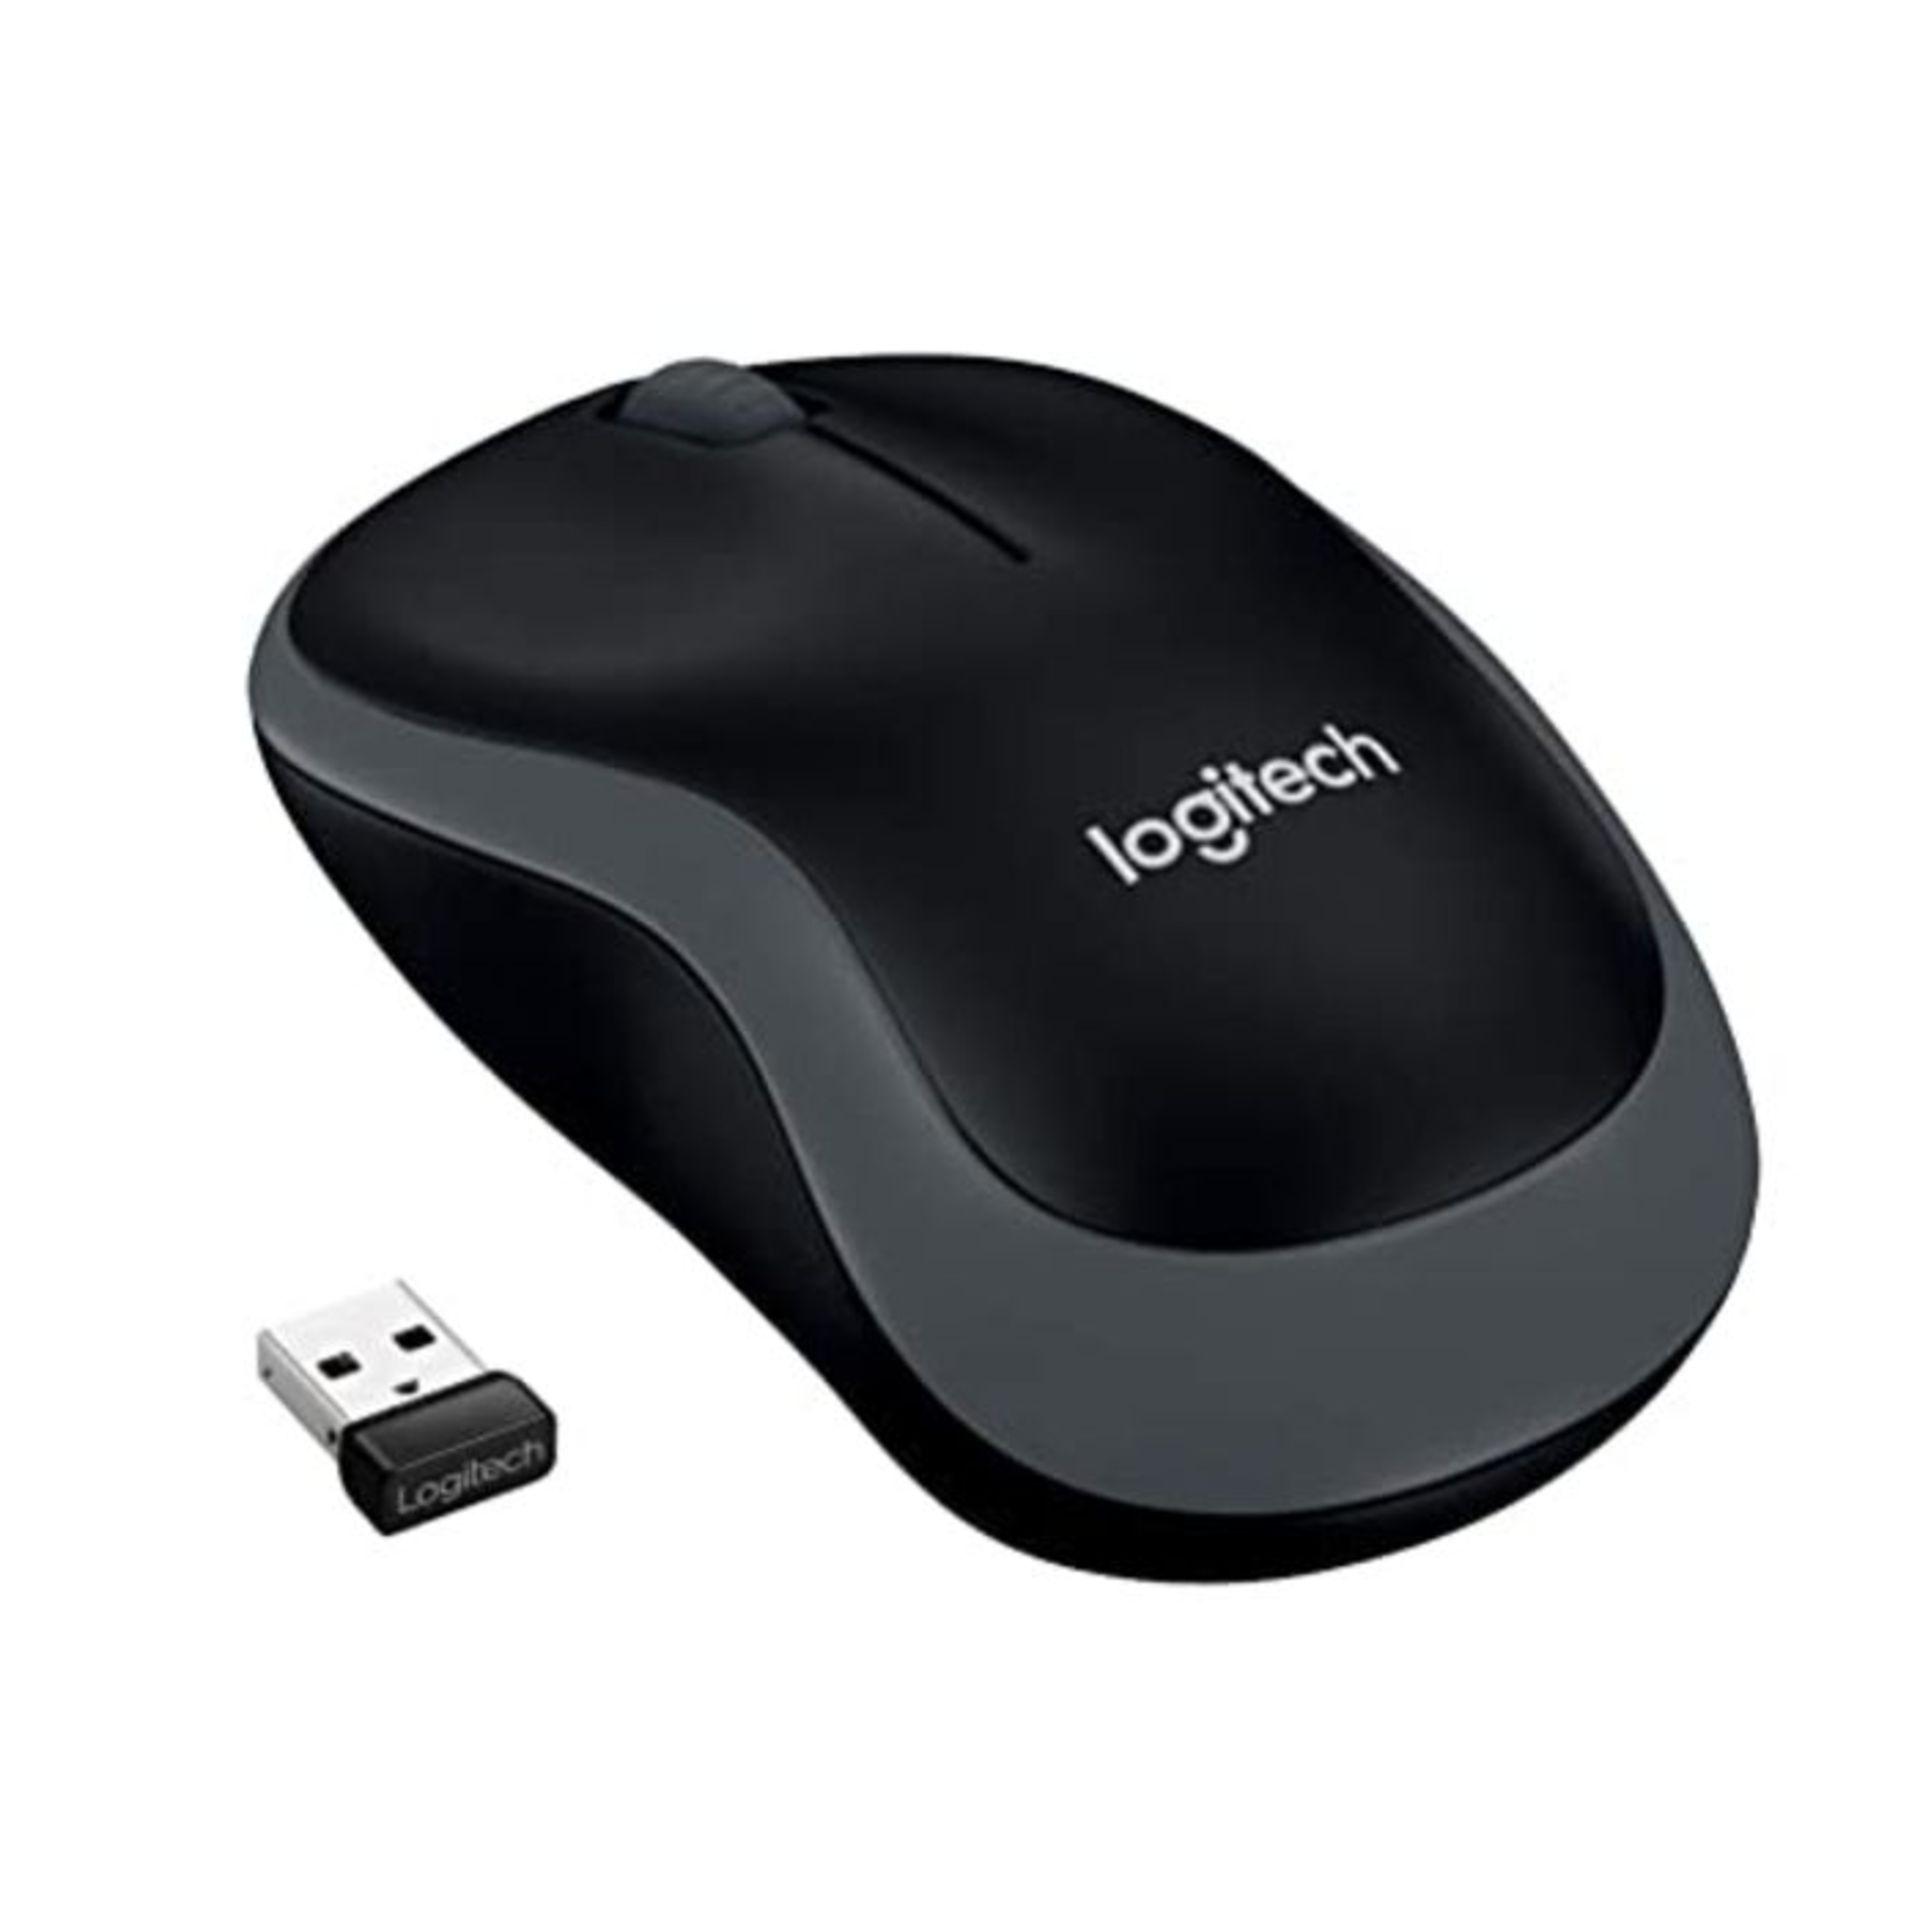 Logitech M185 Wireless Mouse, 2.4GHz with USB Mini Receiver, 12-Month Battery Life, 10